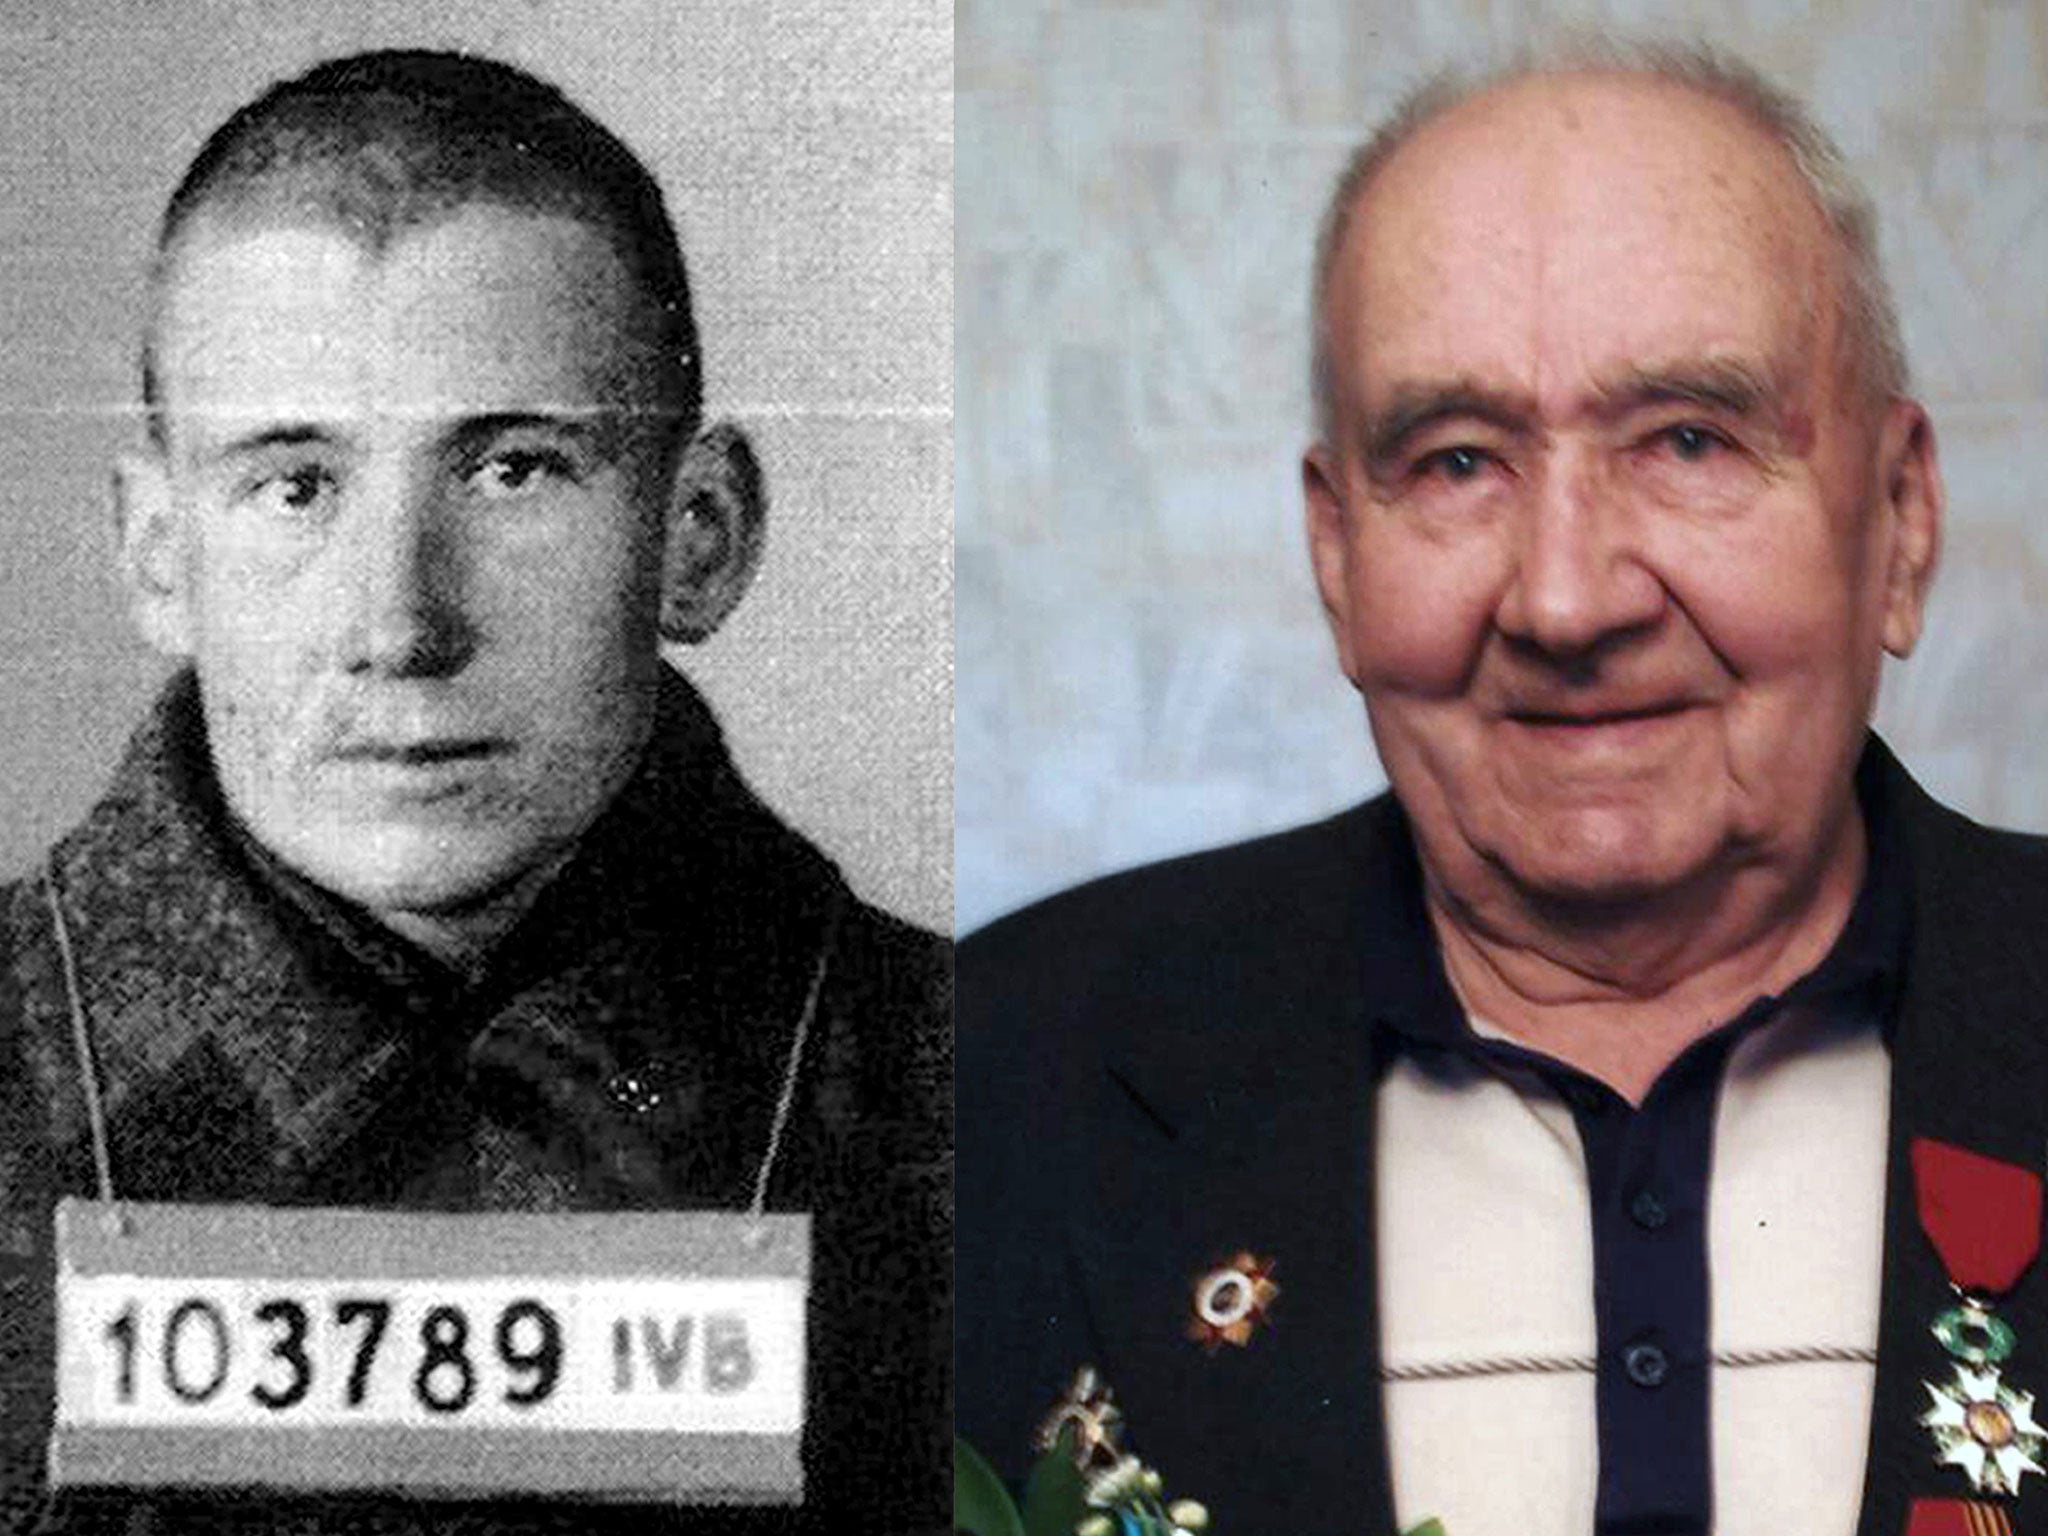 Nikolai Vasenin in 1942 during his imprisonment, and today